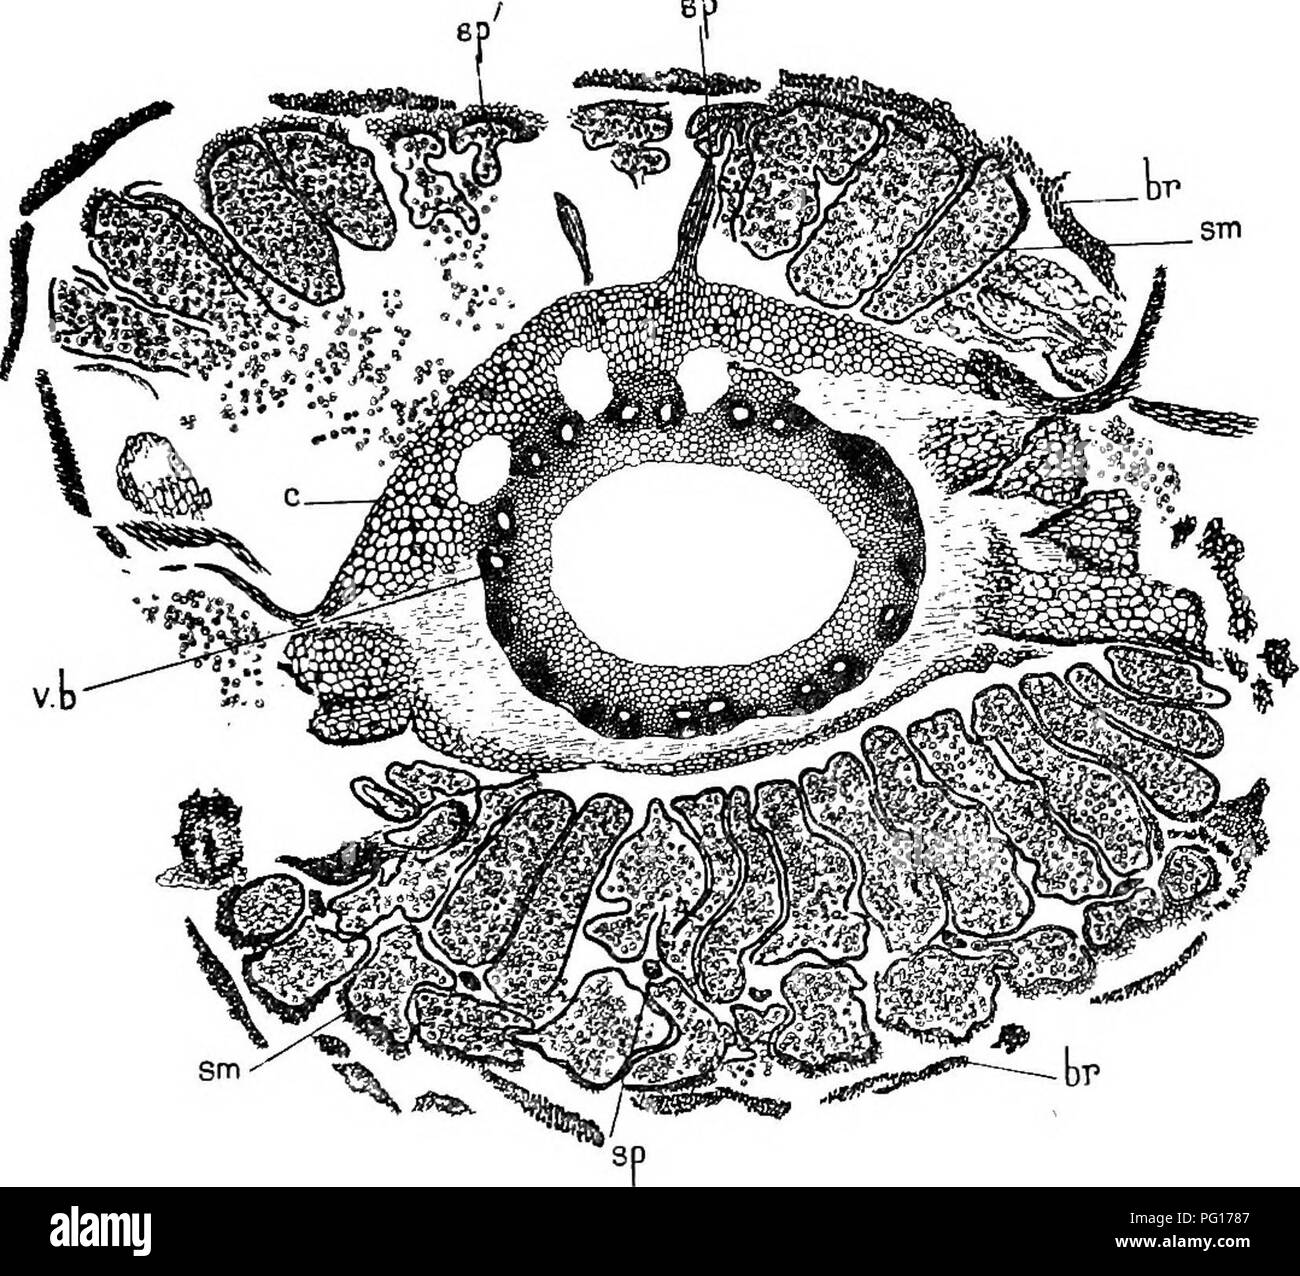 . Studies in fossil botany . Paleobotany. PALAEOSTACHYA 65 of one kind, and of similar dimensions to those of Calamostachys Binneyana. The apparently axillary position of the sporangio- phores in Palaeostachya evidently suggests caution in. Fig. 26.—Palaeostachyavera. Transverse section of cone. Surrounding the fistular pith is the ring of bundles (v£&gt;) grouped in pairs. Outside them is the cortex and disc (c). sp, pedicels of the sporangiophores, some shown attached to the axis, others between the sporangia (sm)} which are grouped in fours around the sporangiophores; sp', remains of peltat Stock Photo